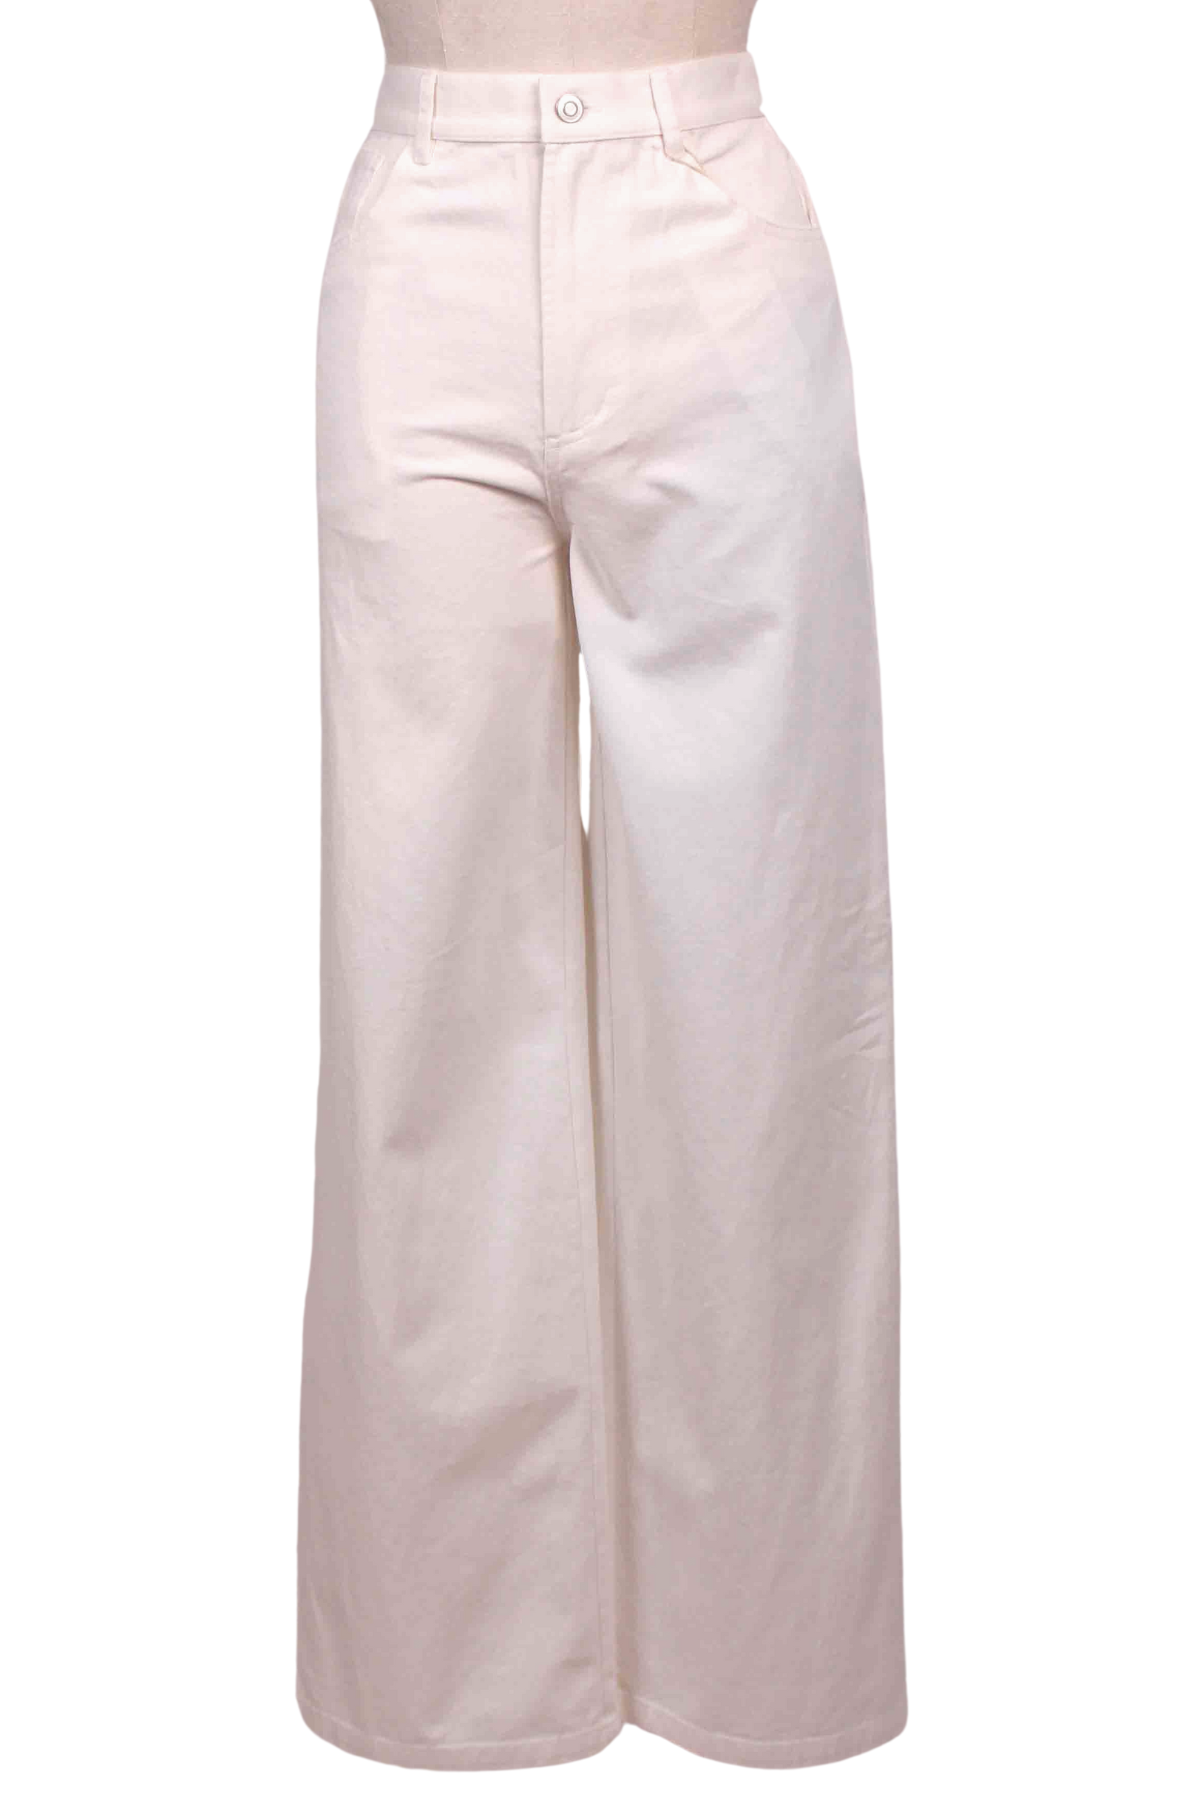 Off White Galerie Wide Leg Twill Pant by Rue Sophie 